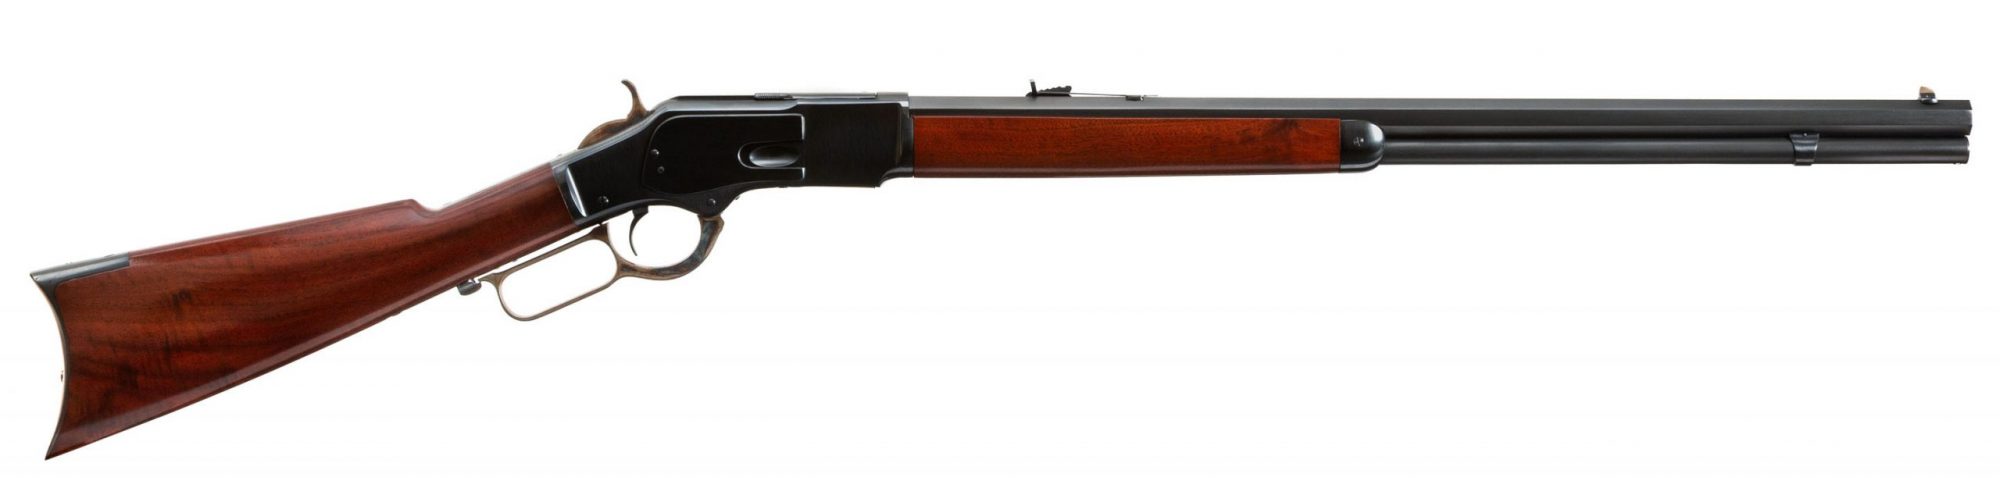 Photo of a Winchester Model 1873 from 1882, restored in 2018 and for sale by Turnbull Restoration